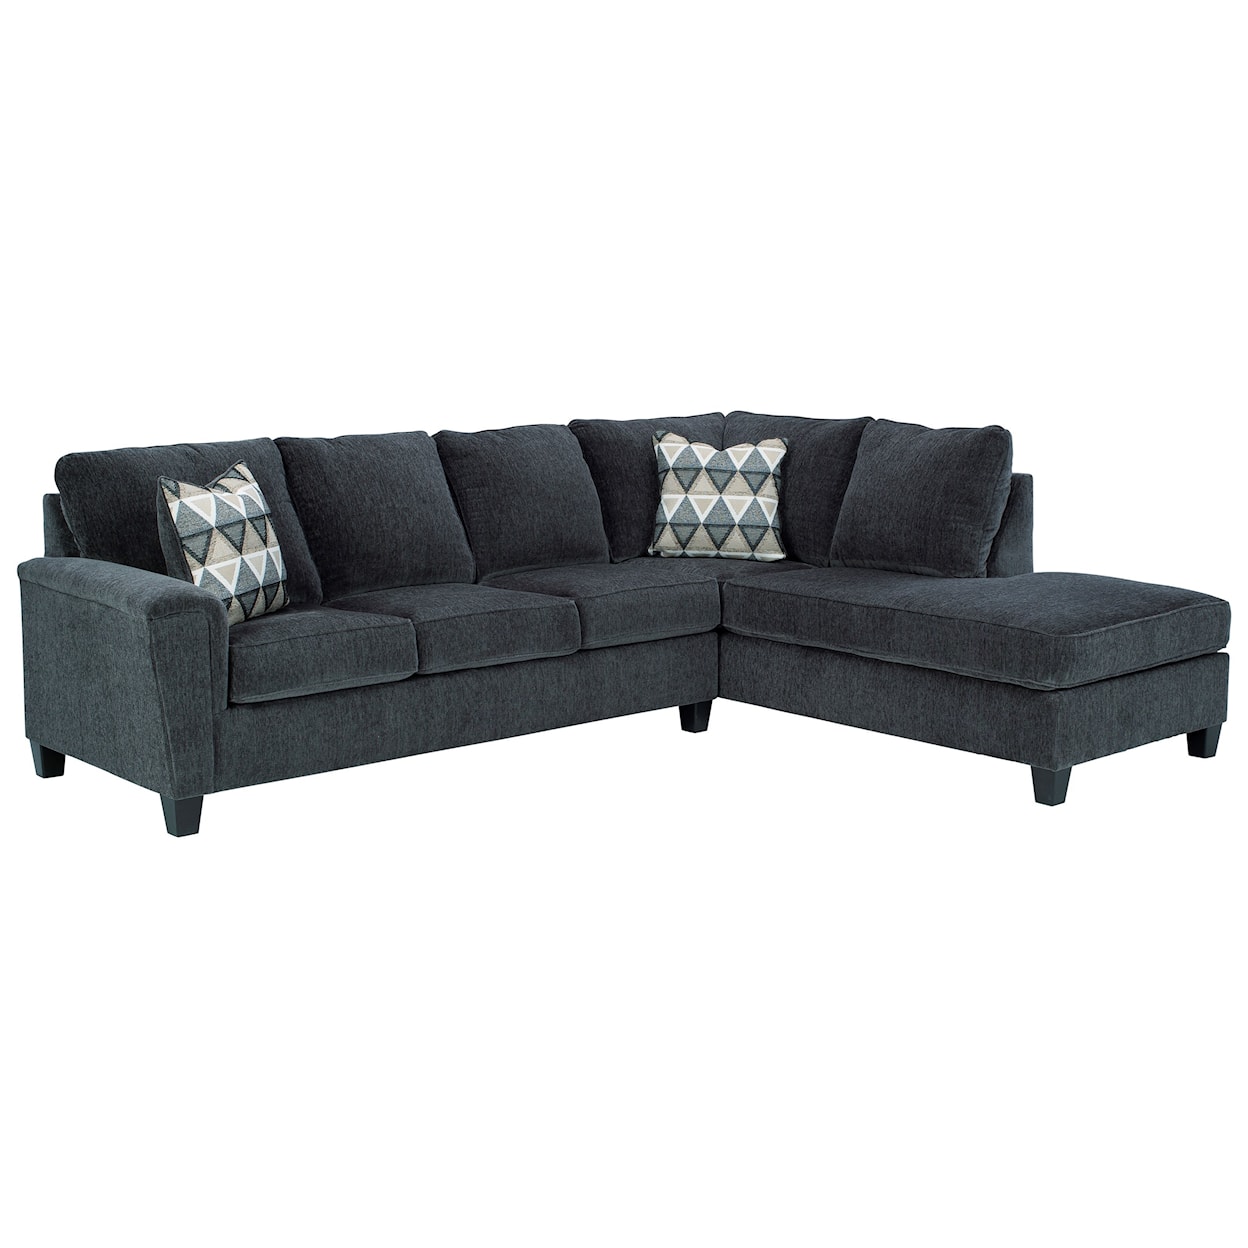 Ashley Furniture Signature Design Abinger 2-Piece Sectional w/ Chaise